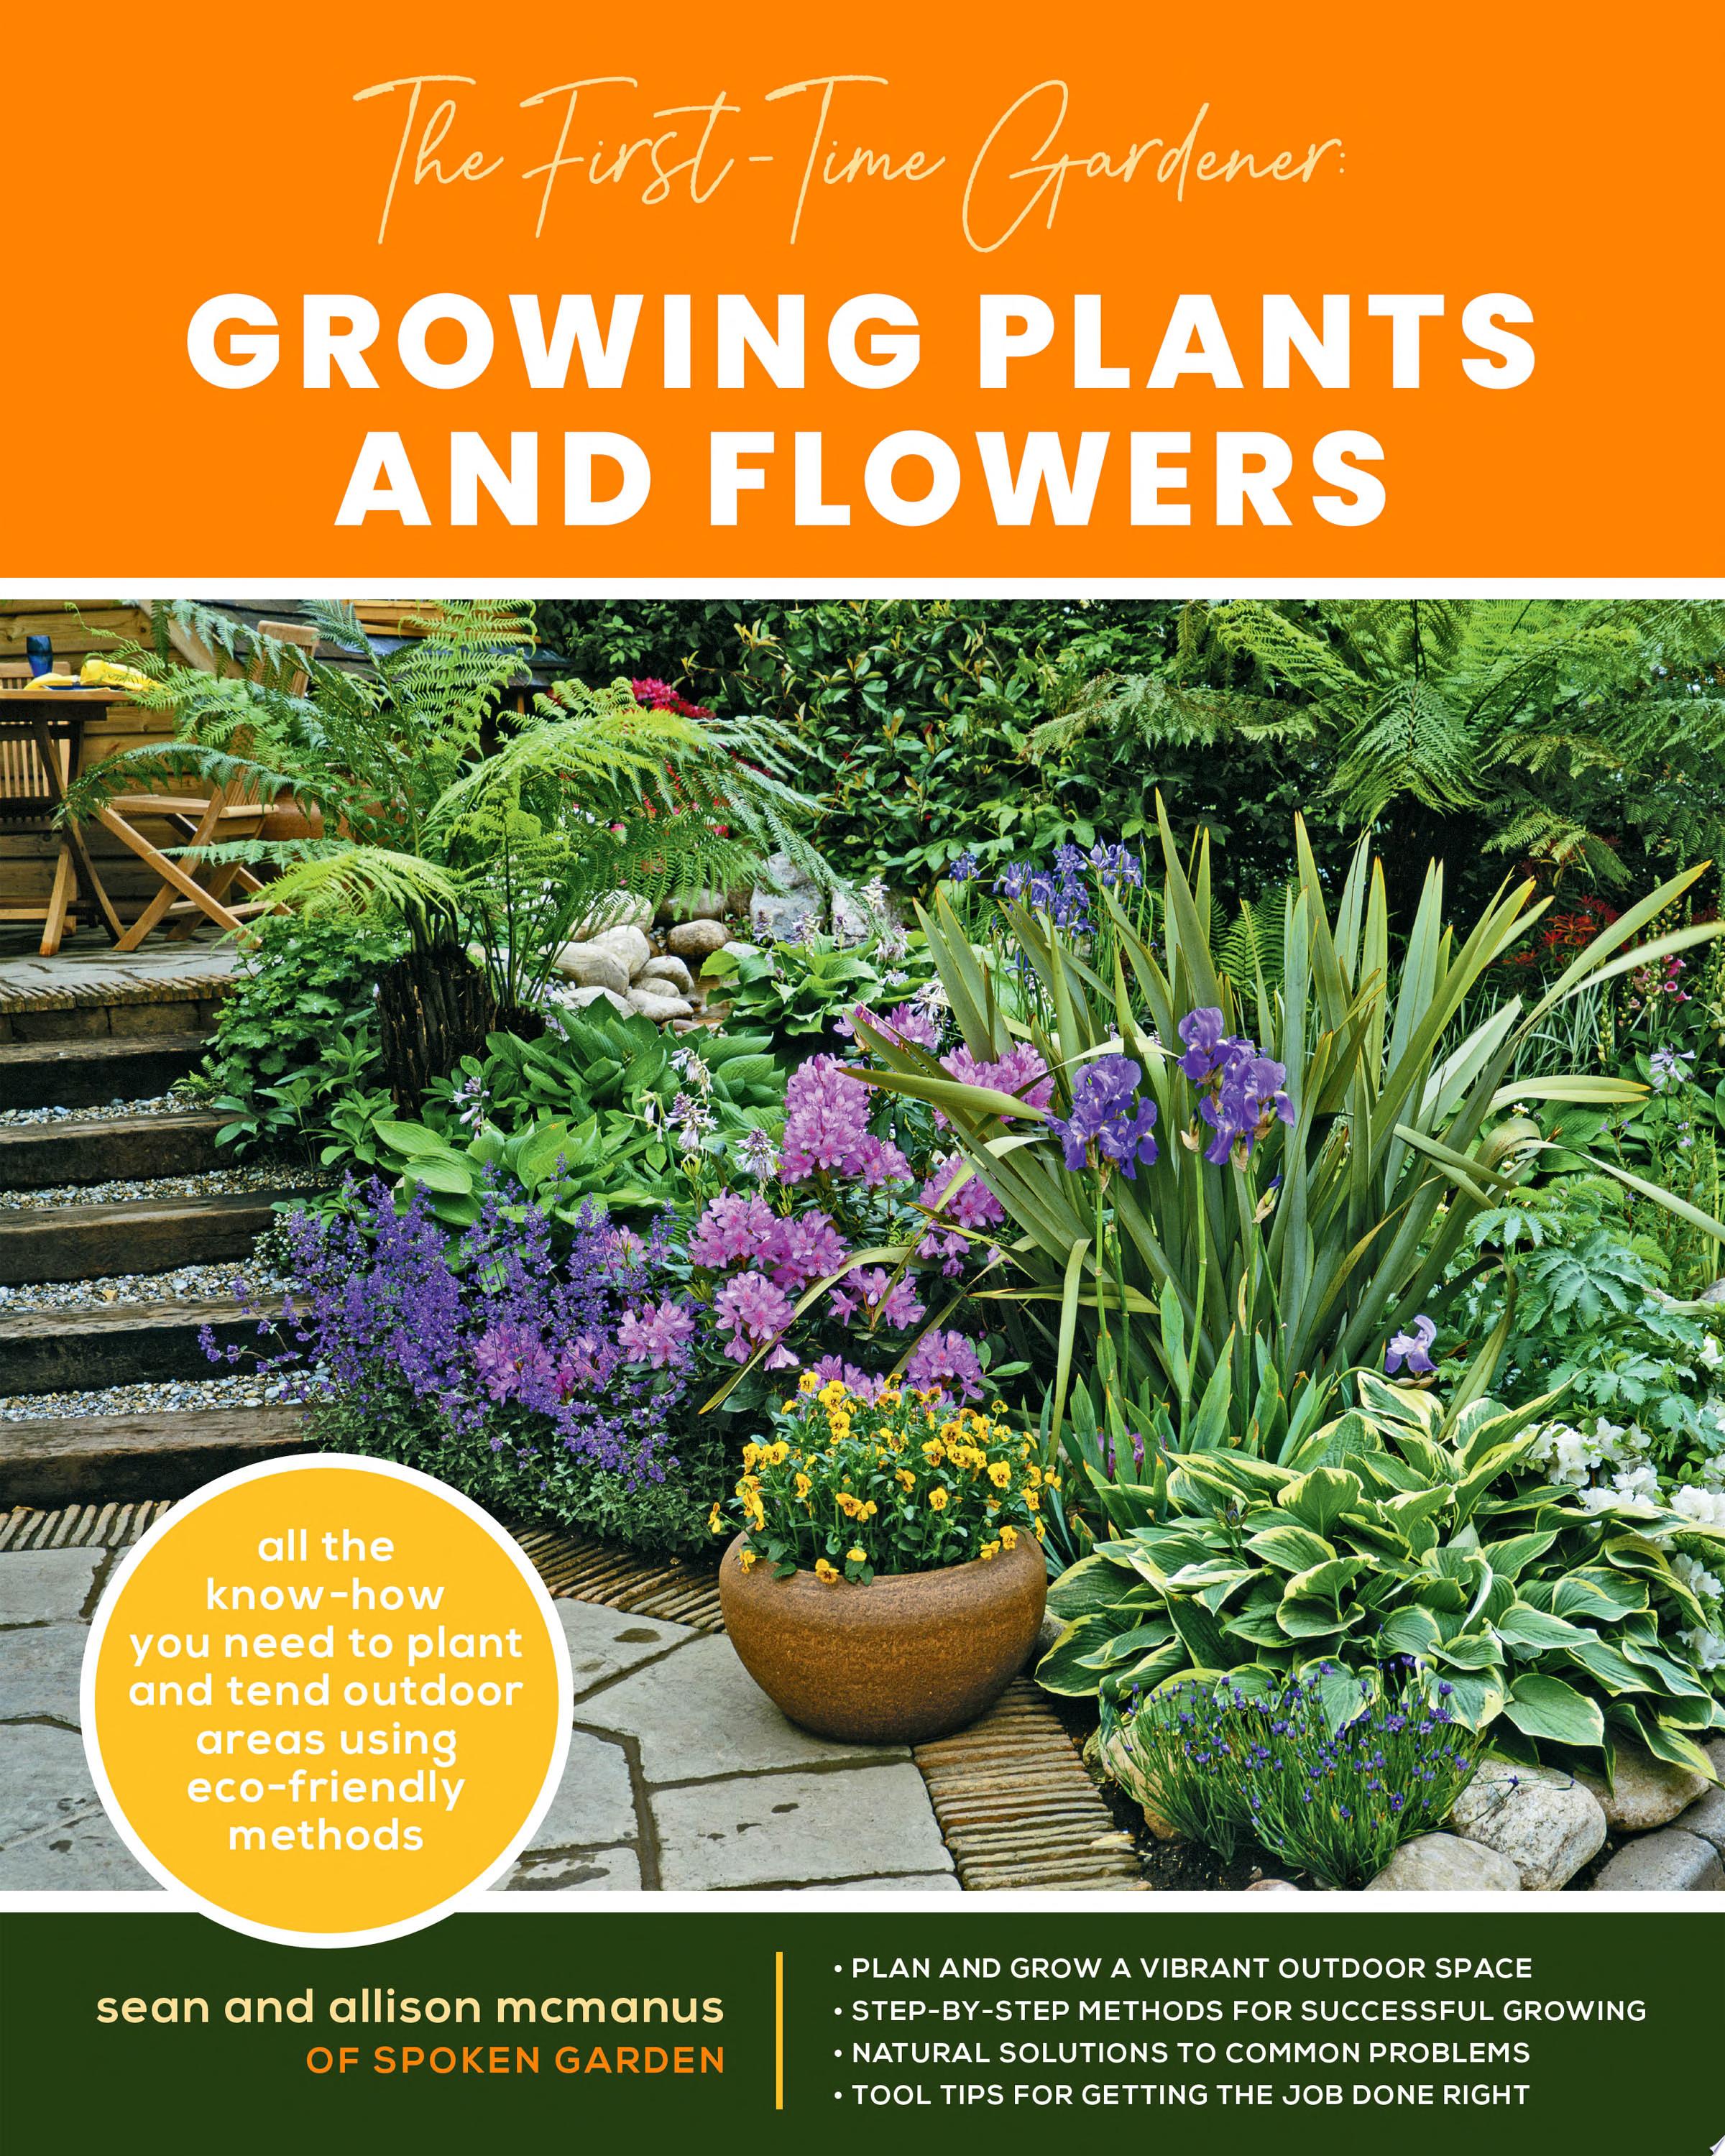 Image for "The First-Time Gardener: Growing Plants and Flowers"